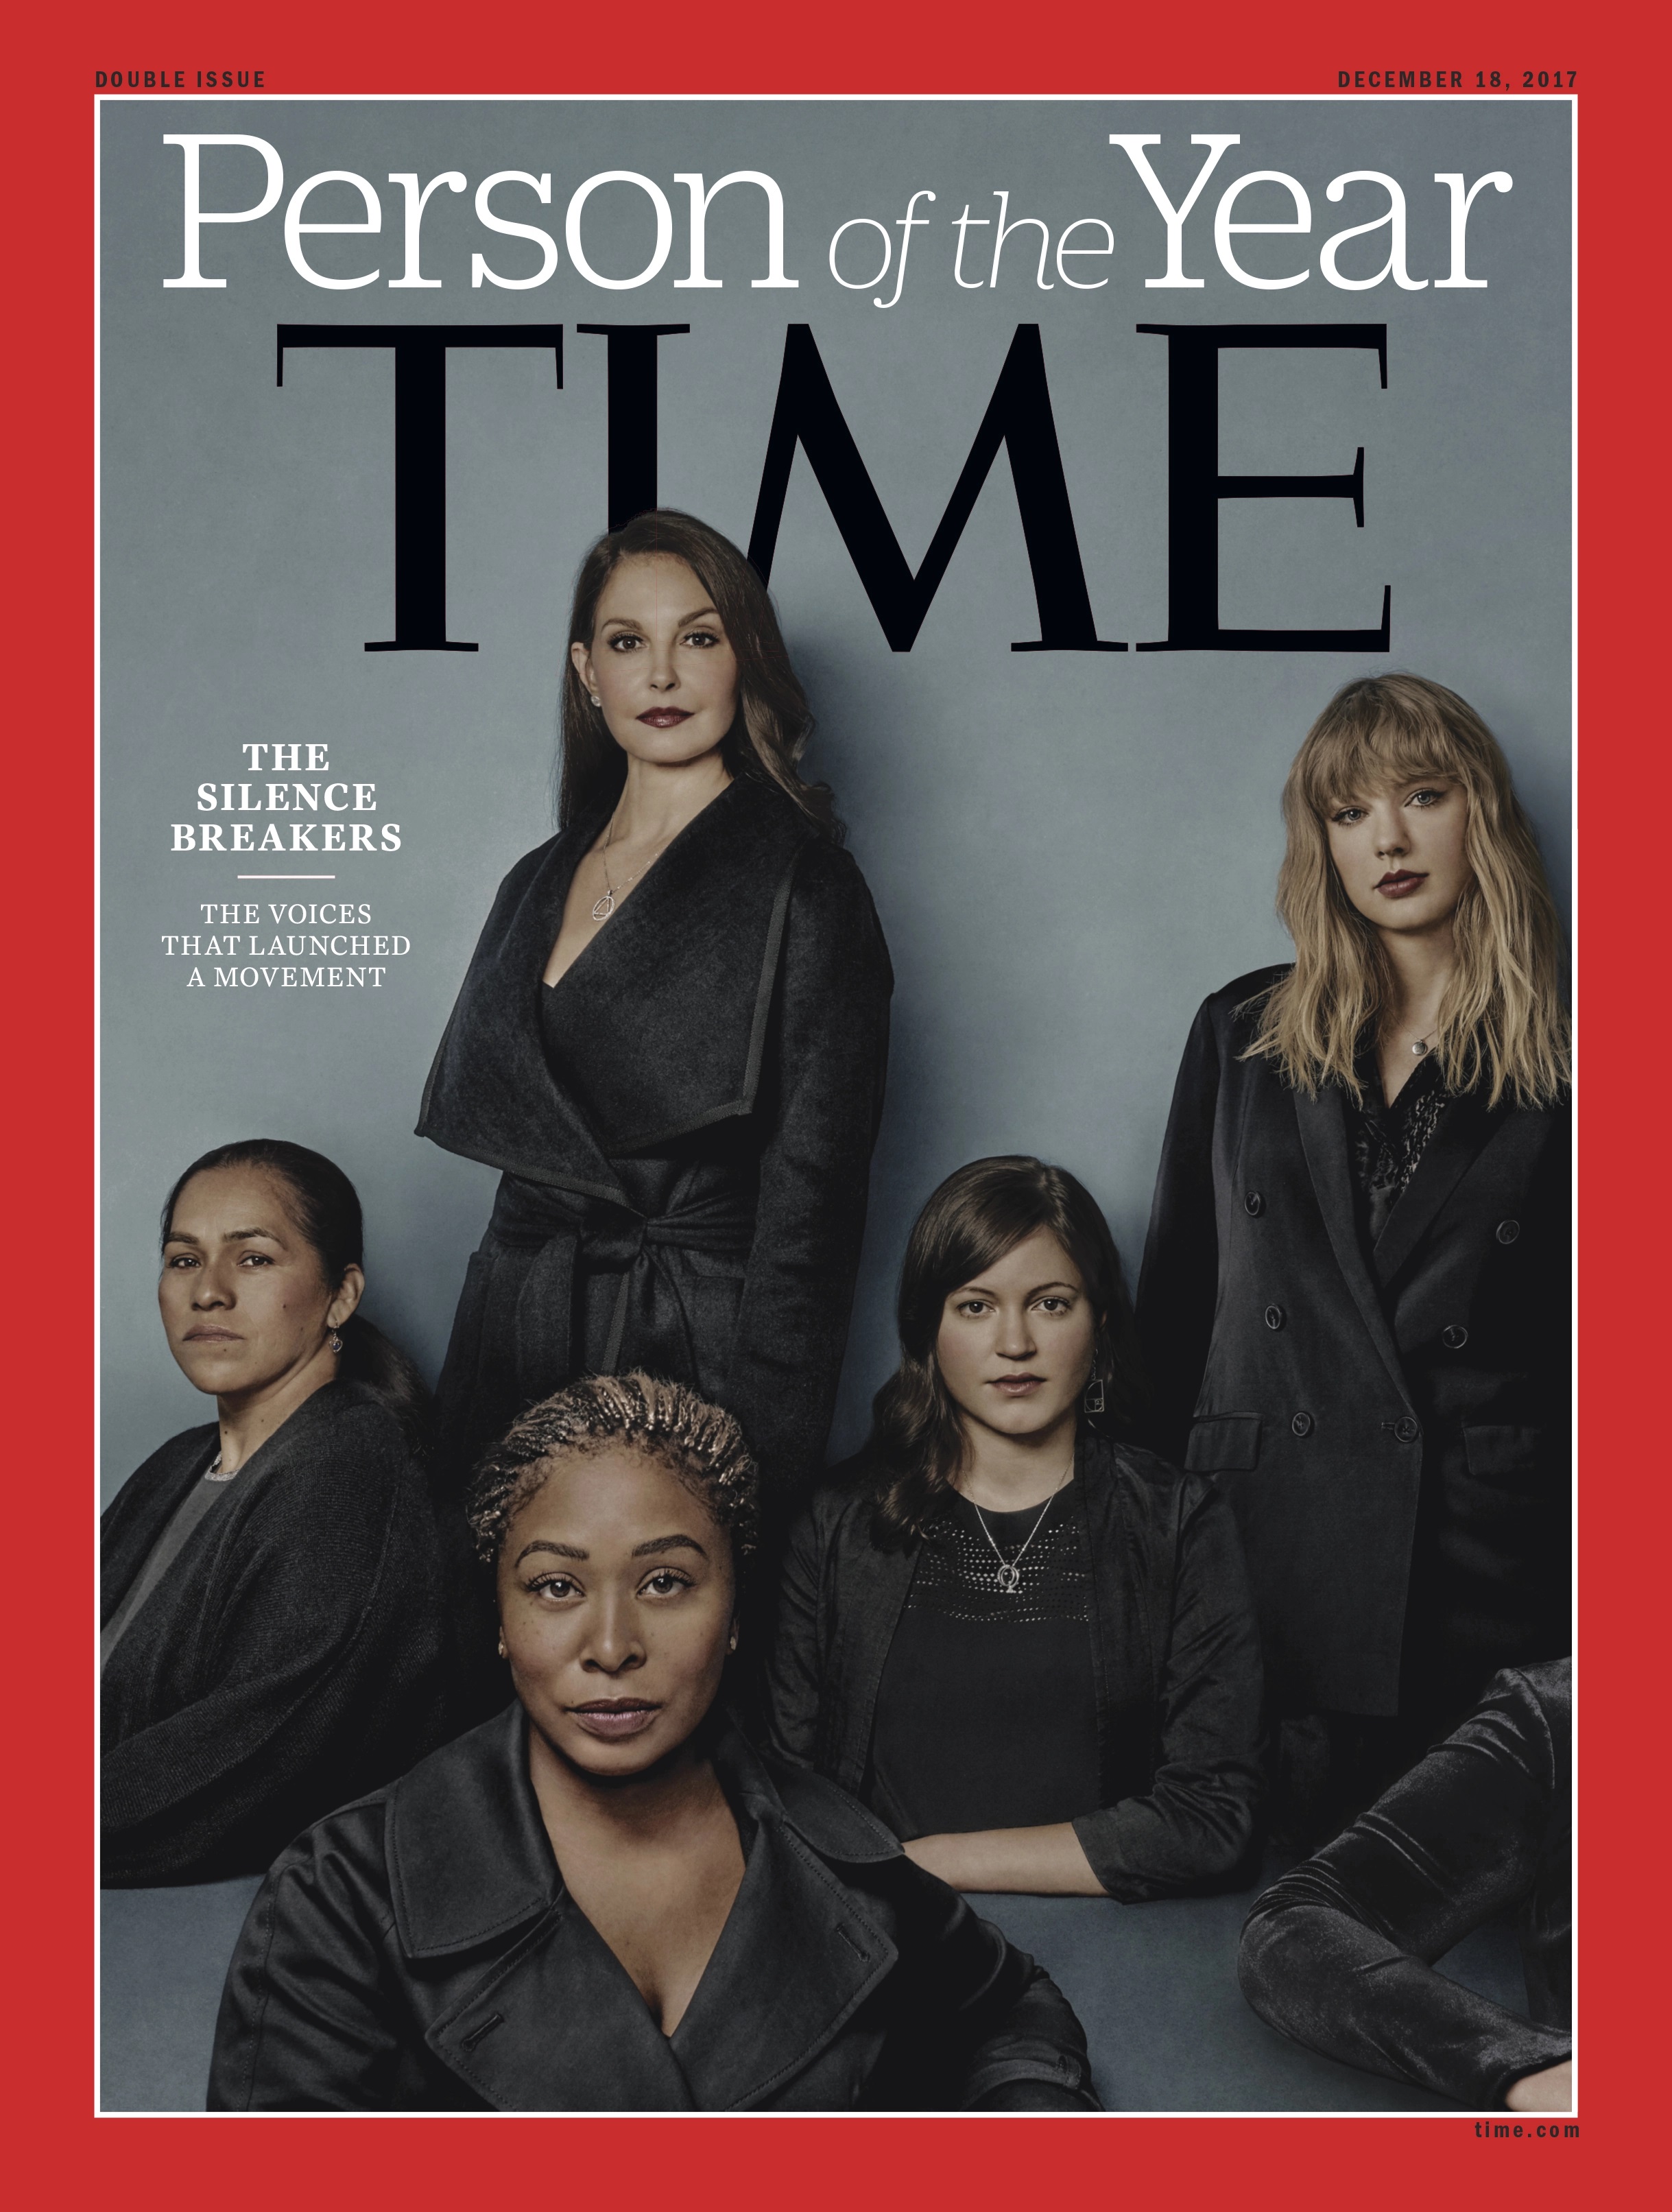 TIME - “Person of the Year [The Silence Breakers],” December 18, 2017